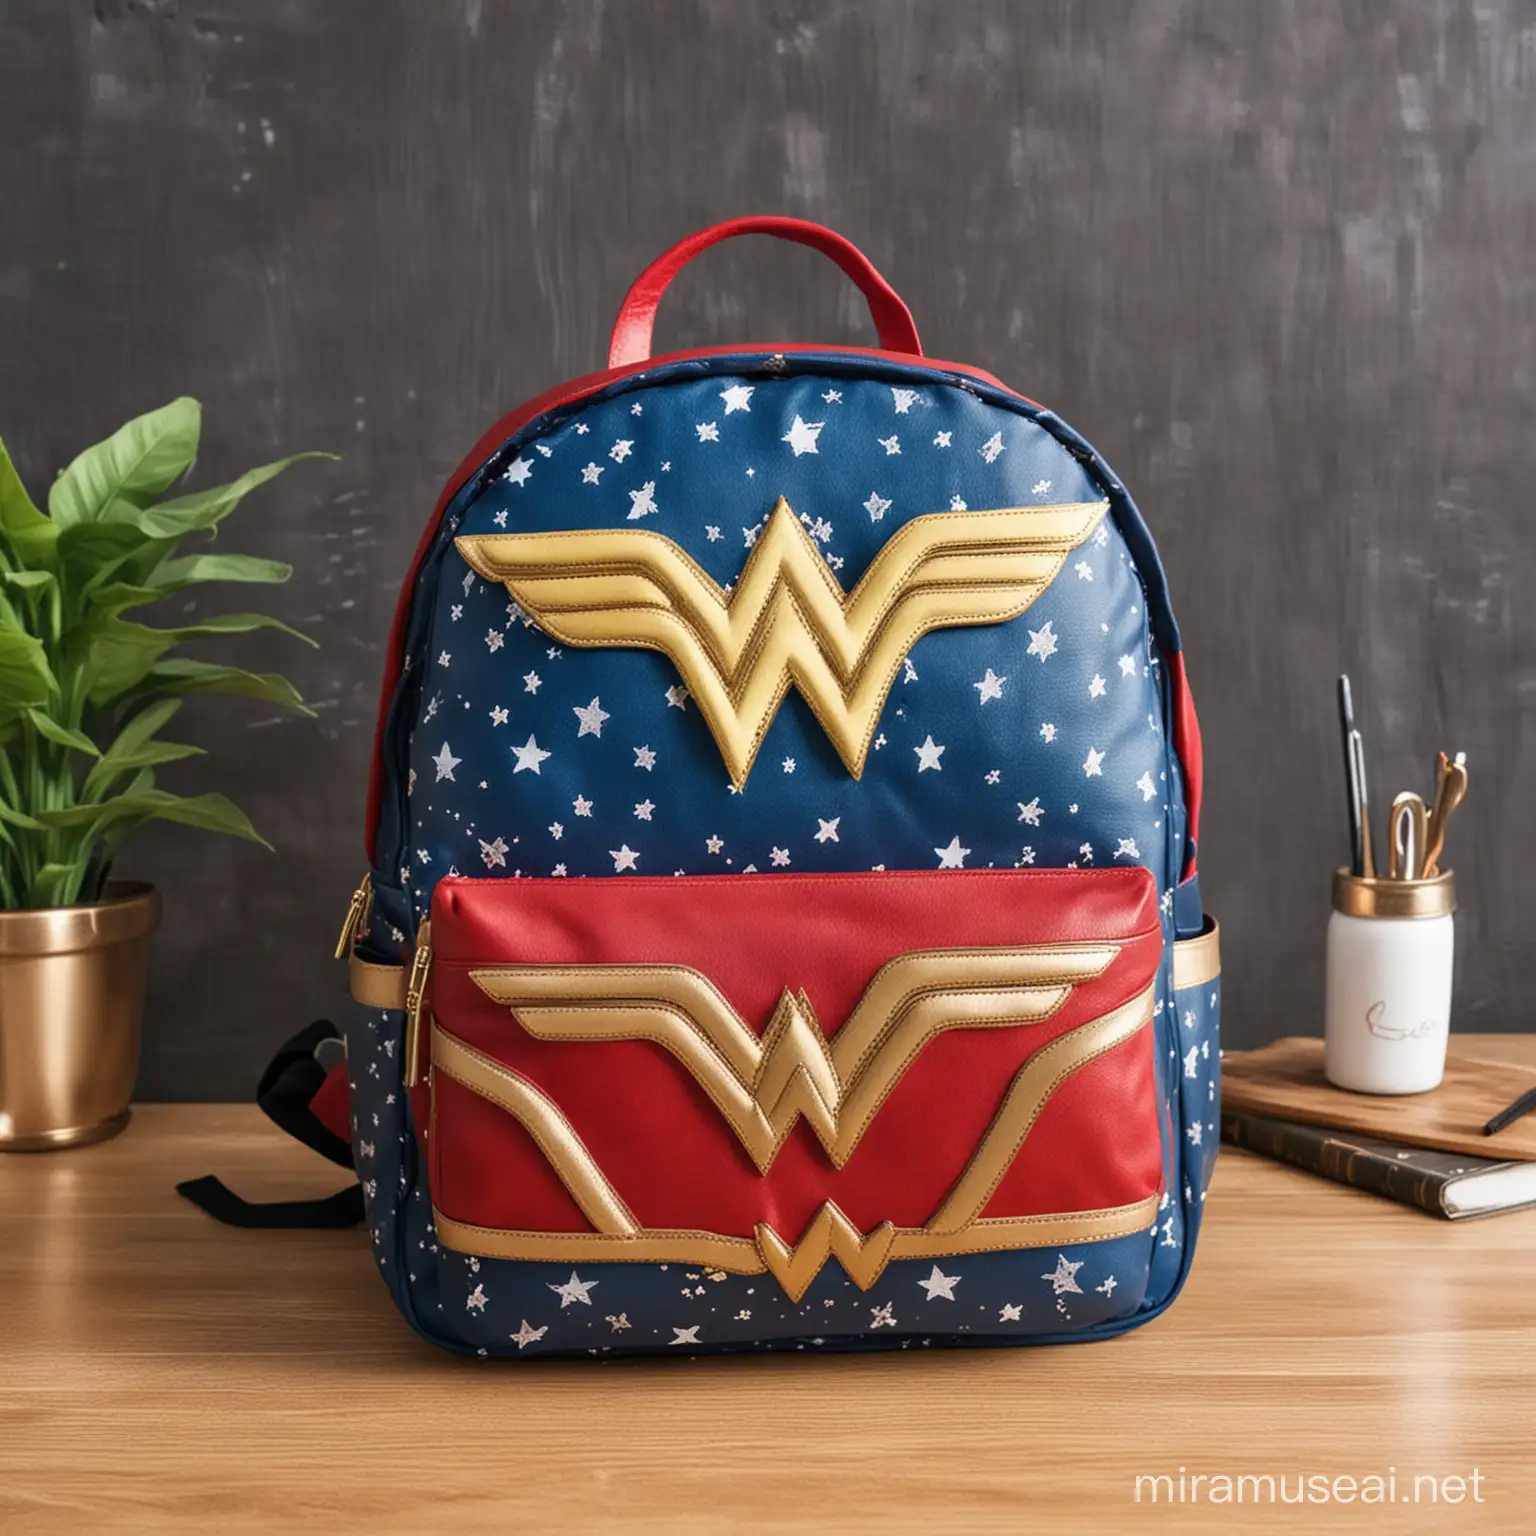 Wonder Woman Style Backpack on the Table